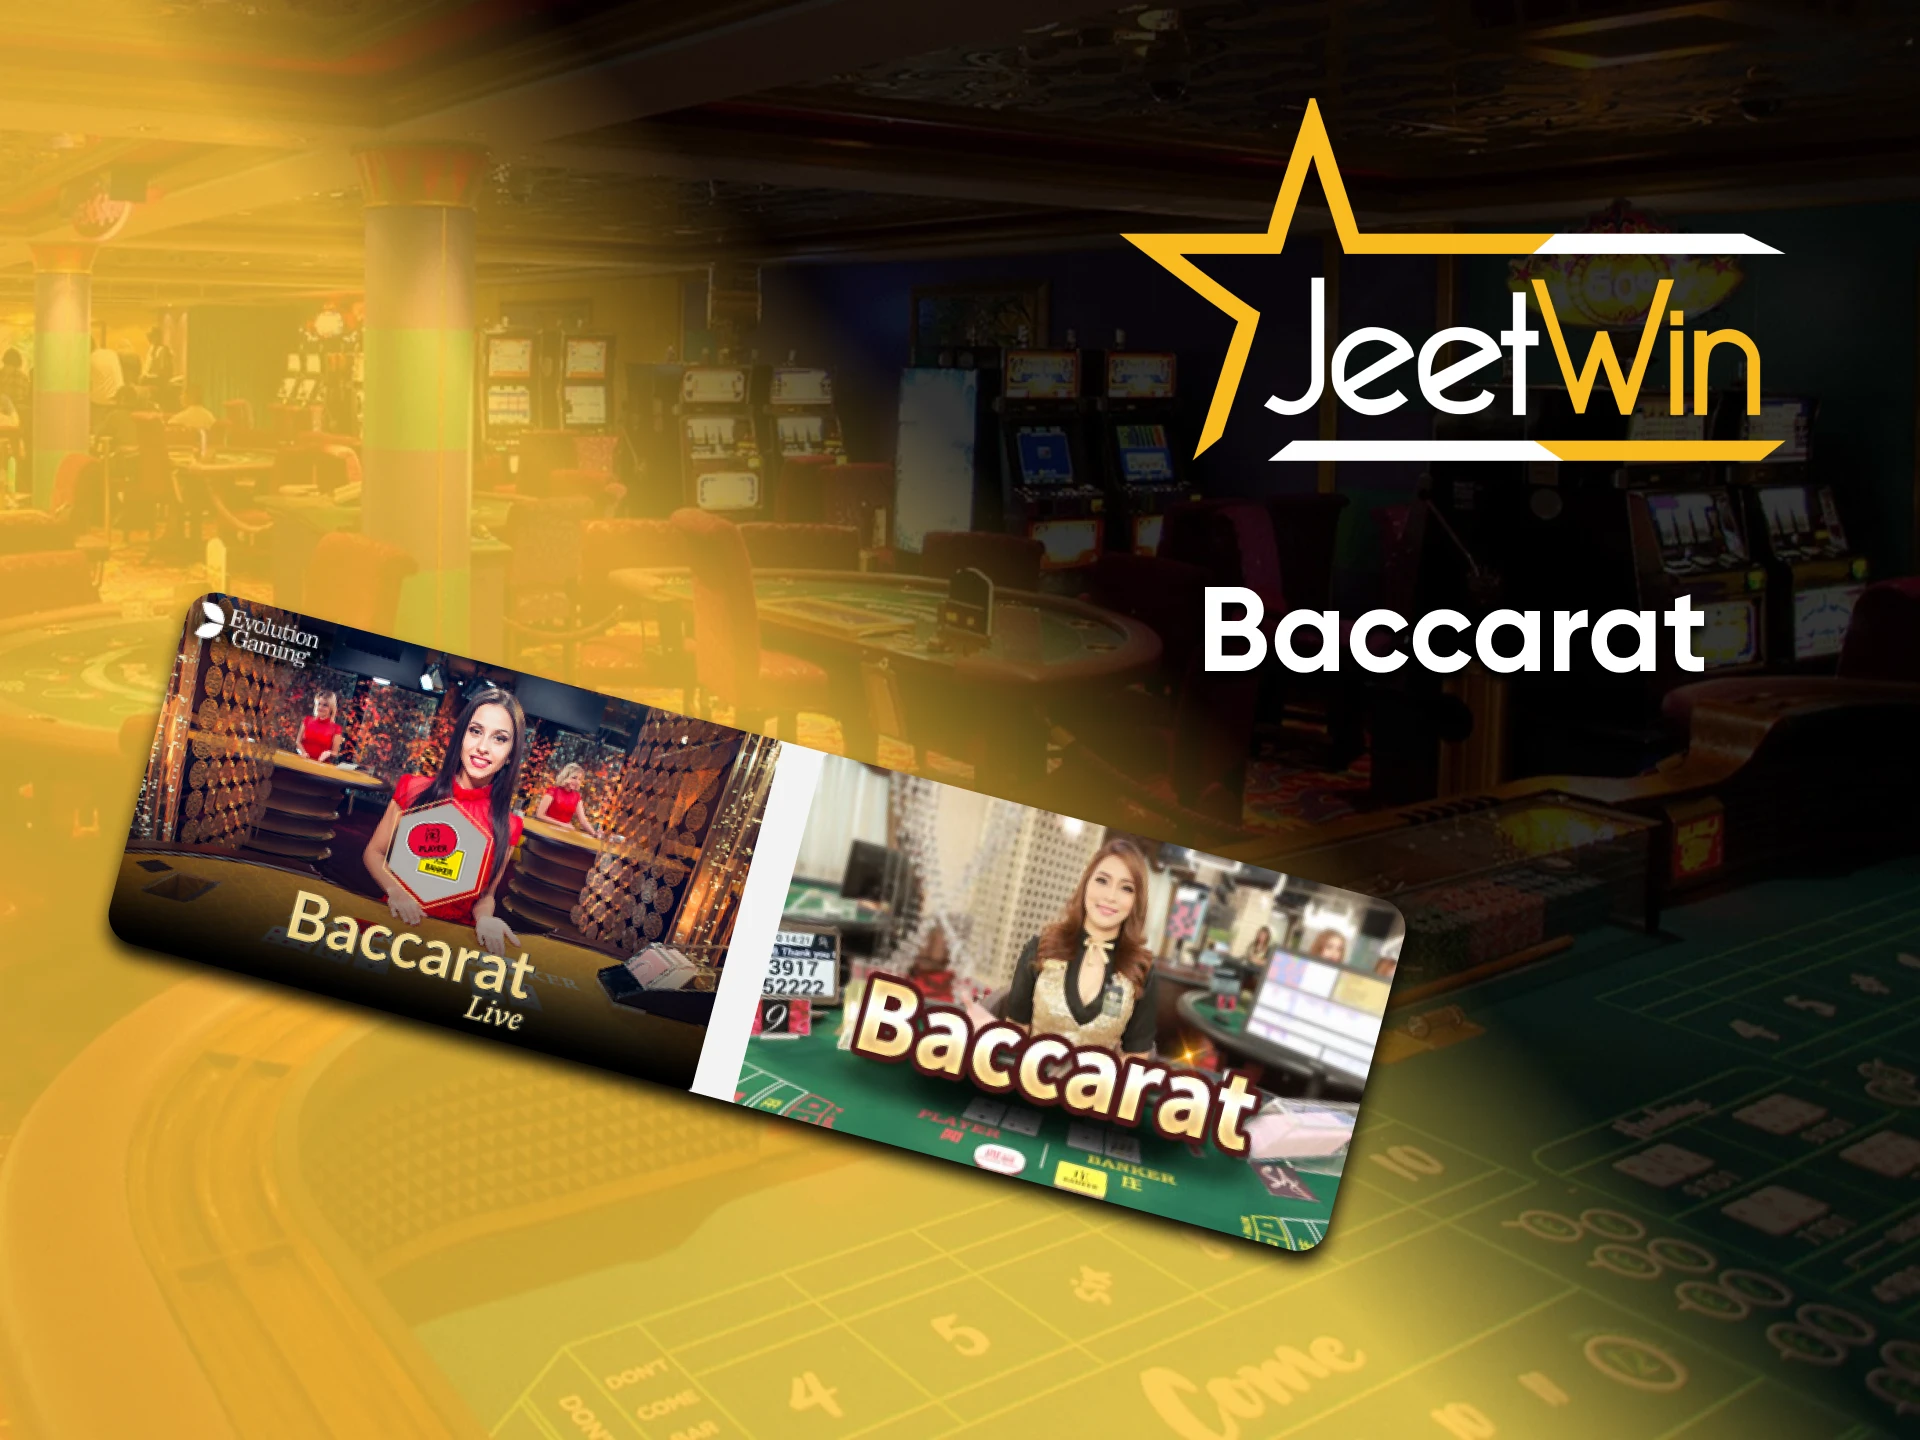 To play Baccarat, you need to go to the desired section of the Jeetwin website.